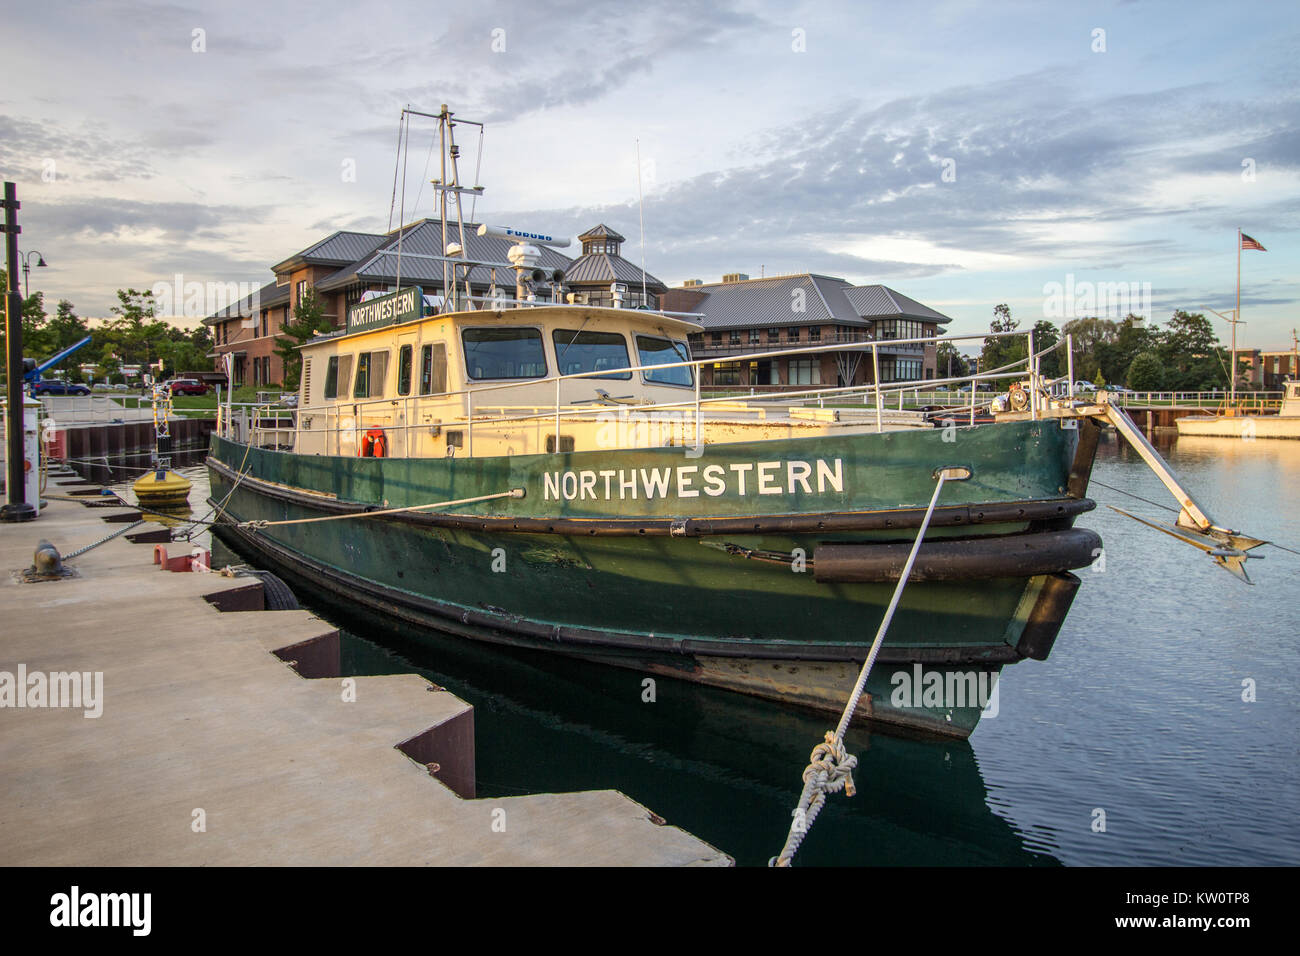 The Northwestern boat docked at the harbor for the Great Lakes Maritime Academy. The Academy is on the campus of Northwestern Michigan University. Stock Photo